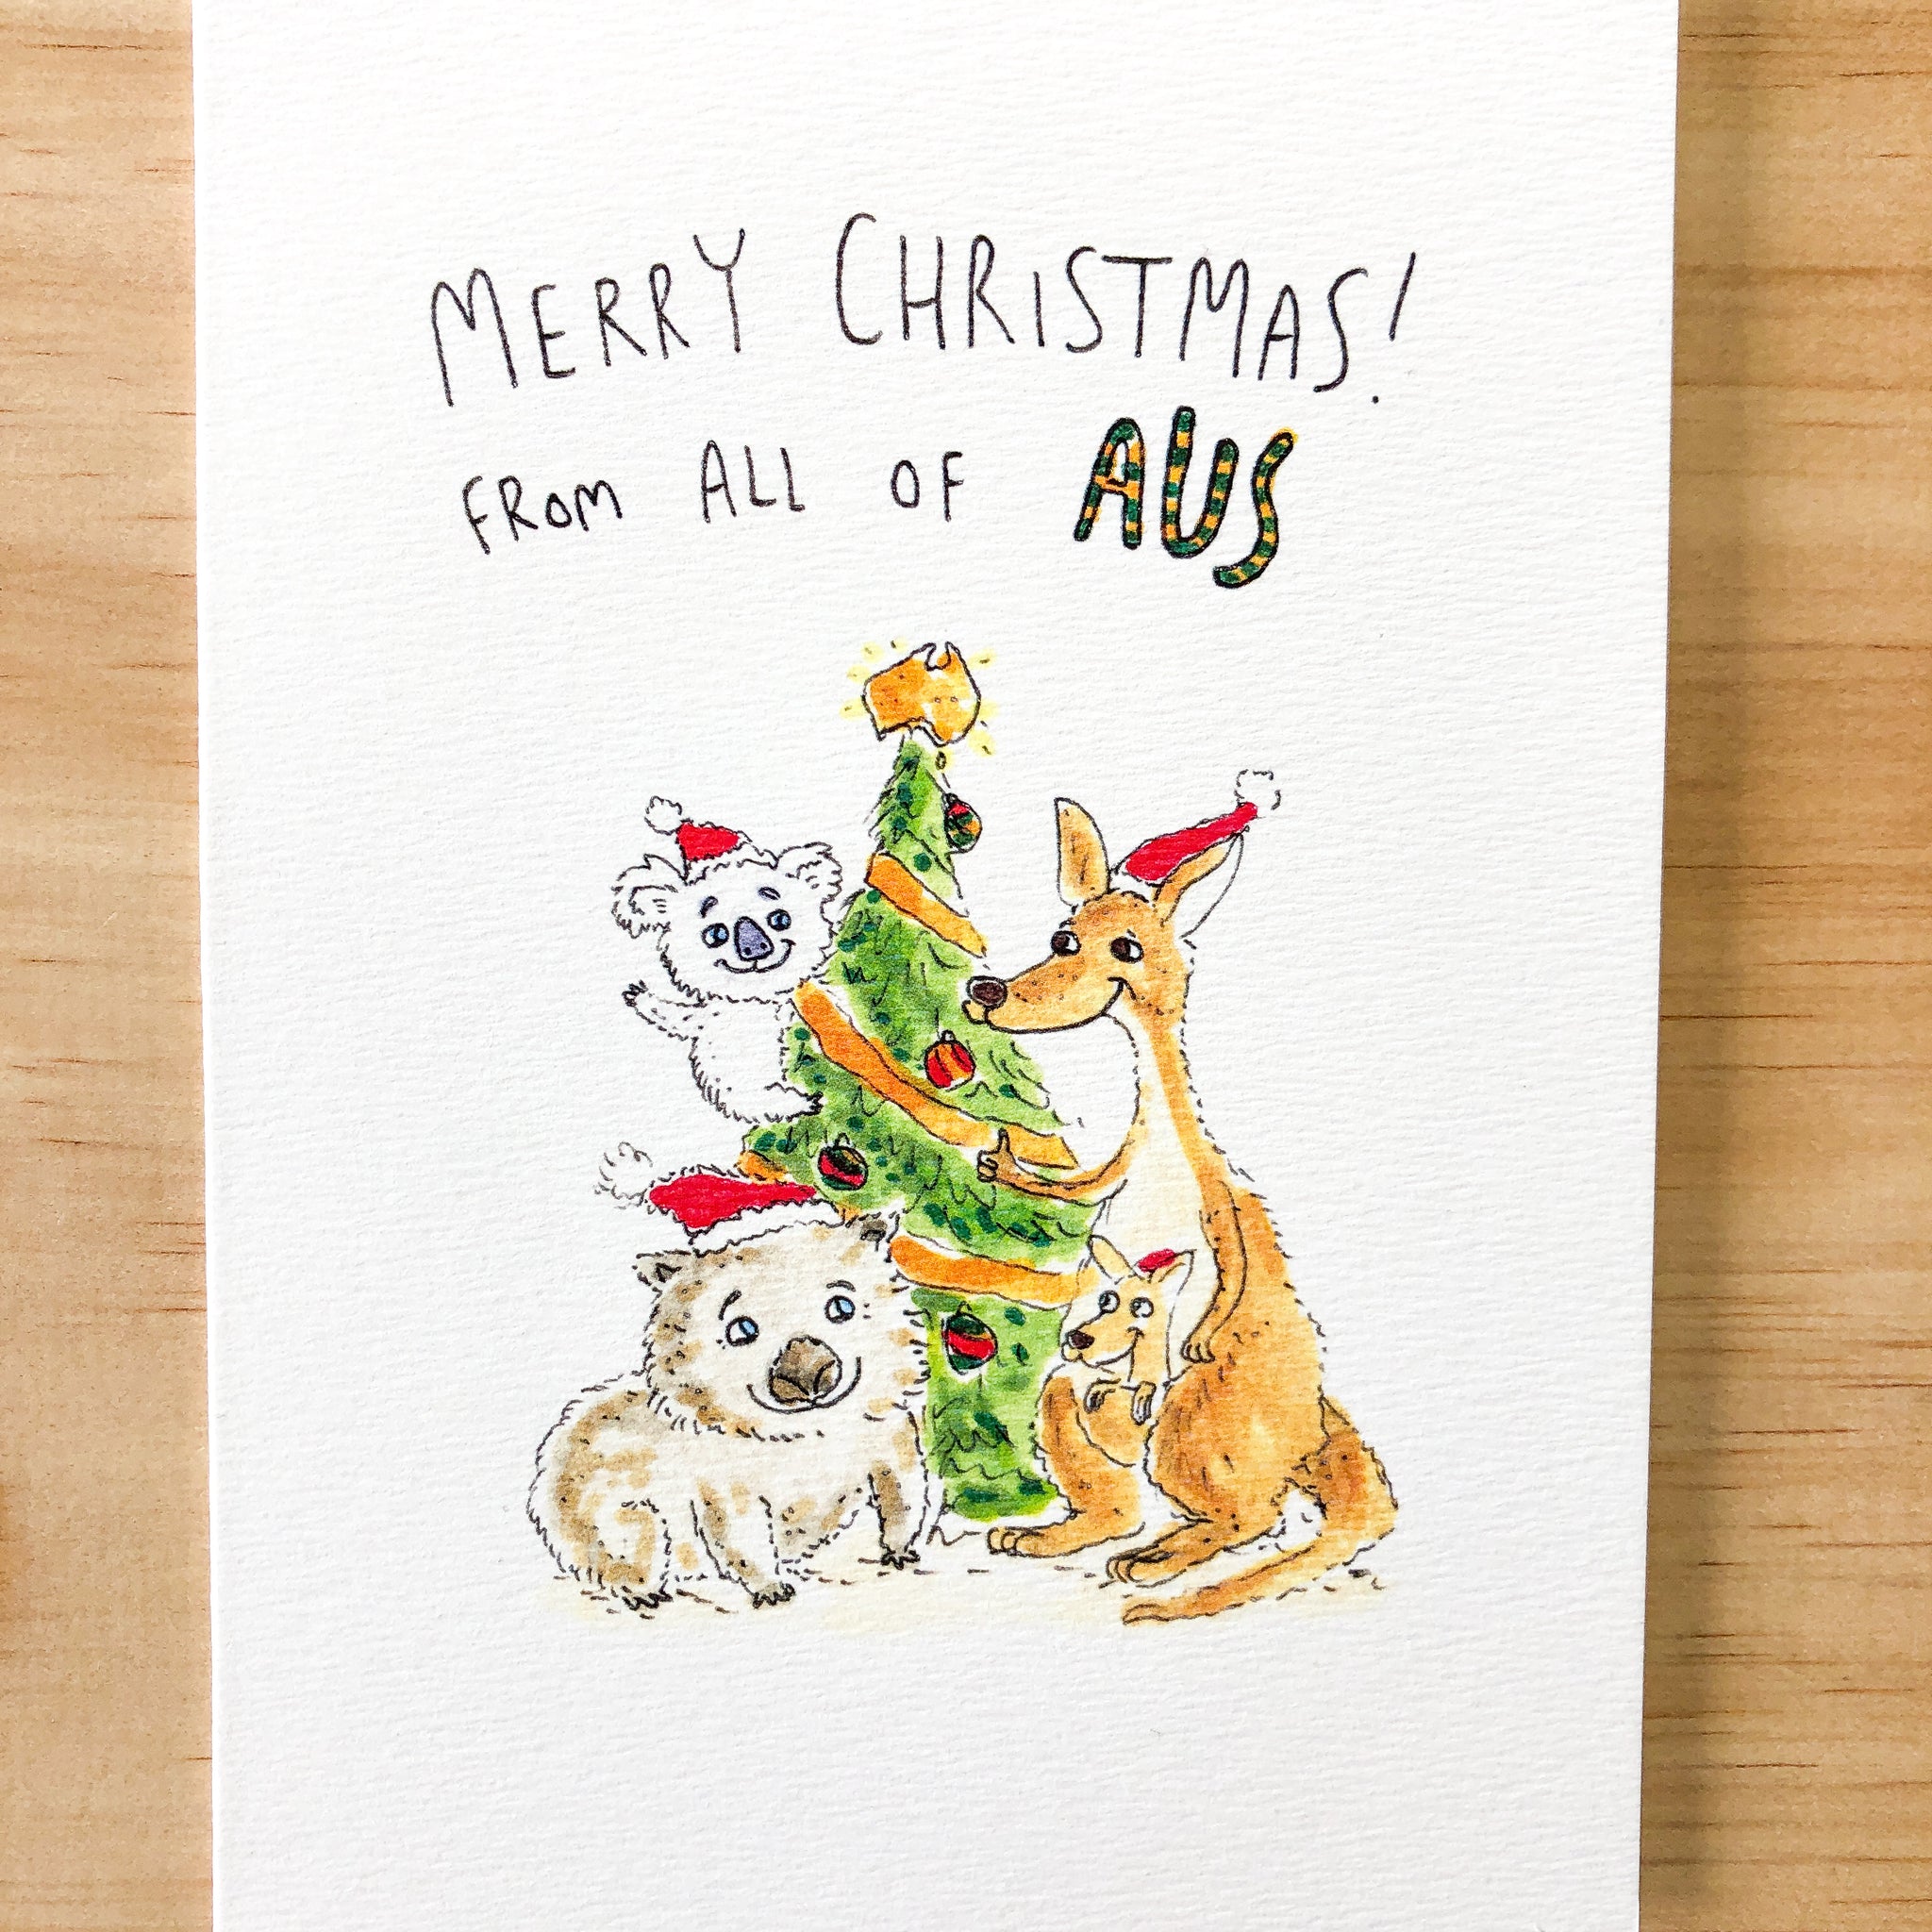 Merry Christmas From All of Aus - Well Drawn